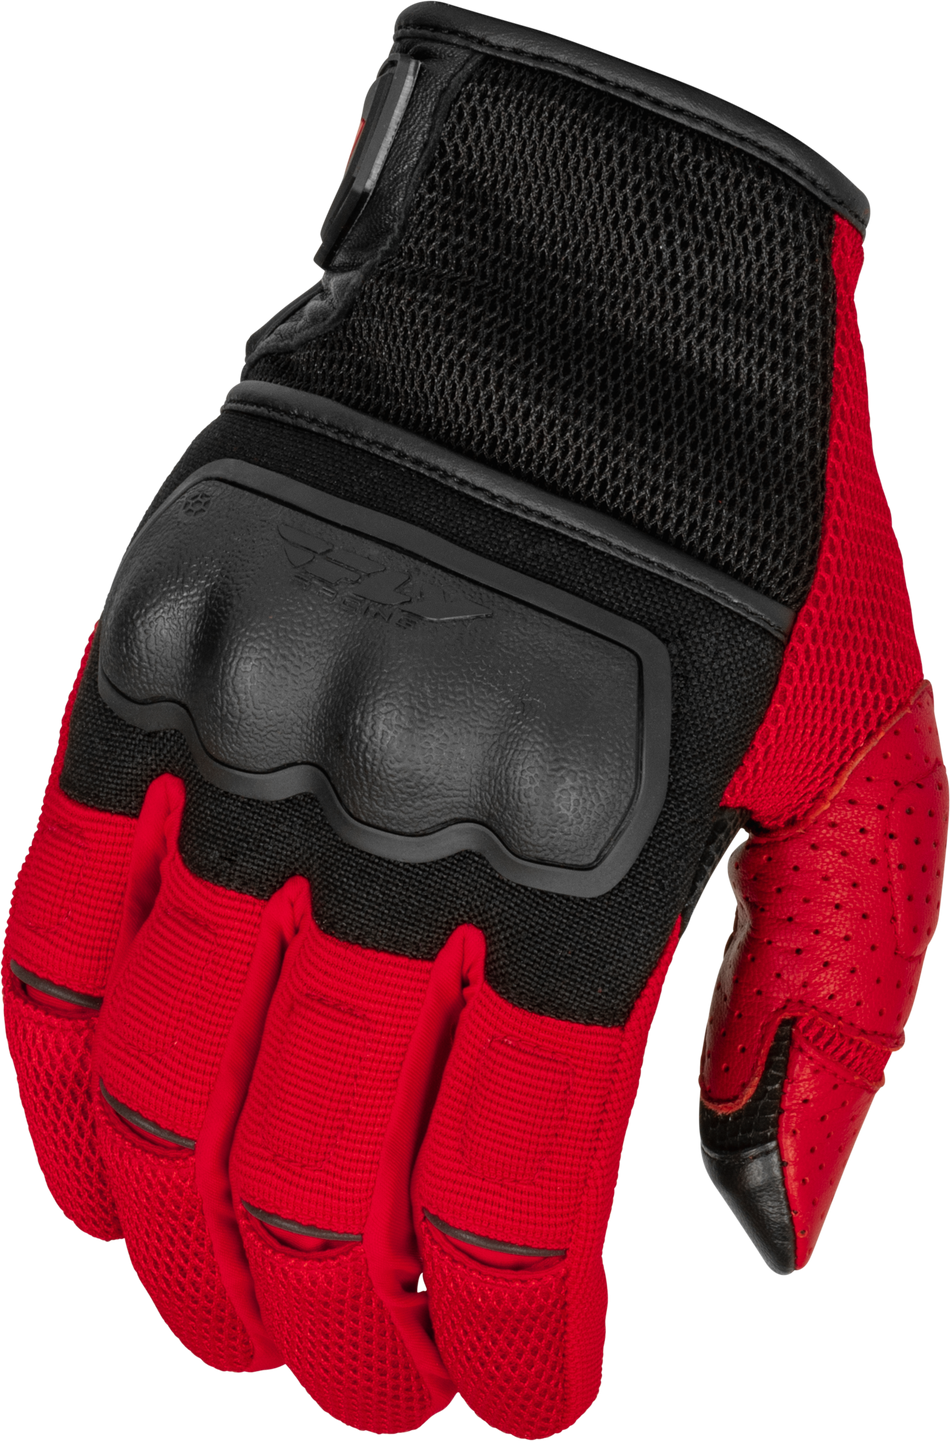 FLY RACING Coolpro Force Gloves Black/Red 3x 476-41293X